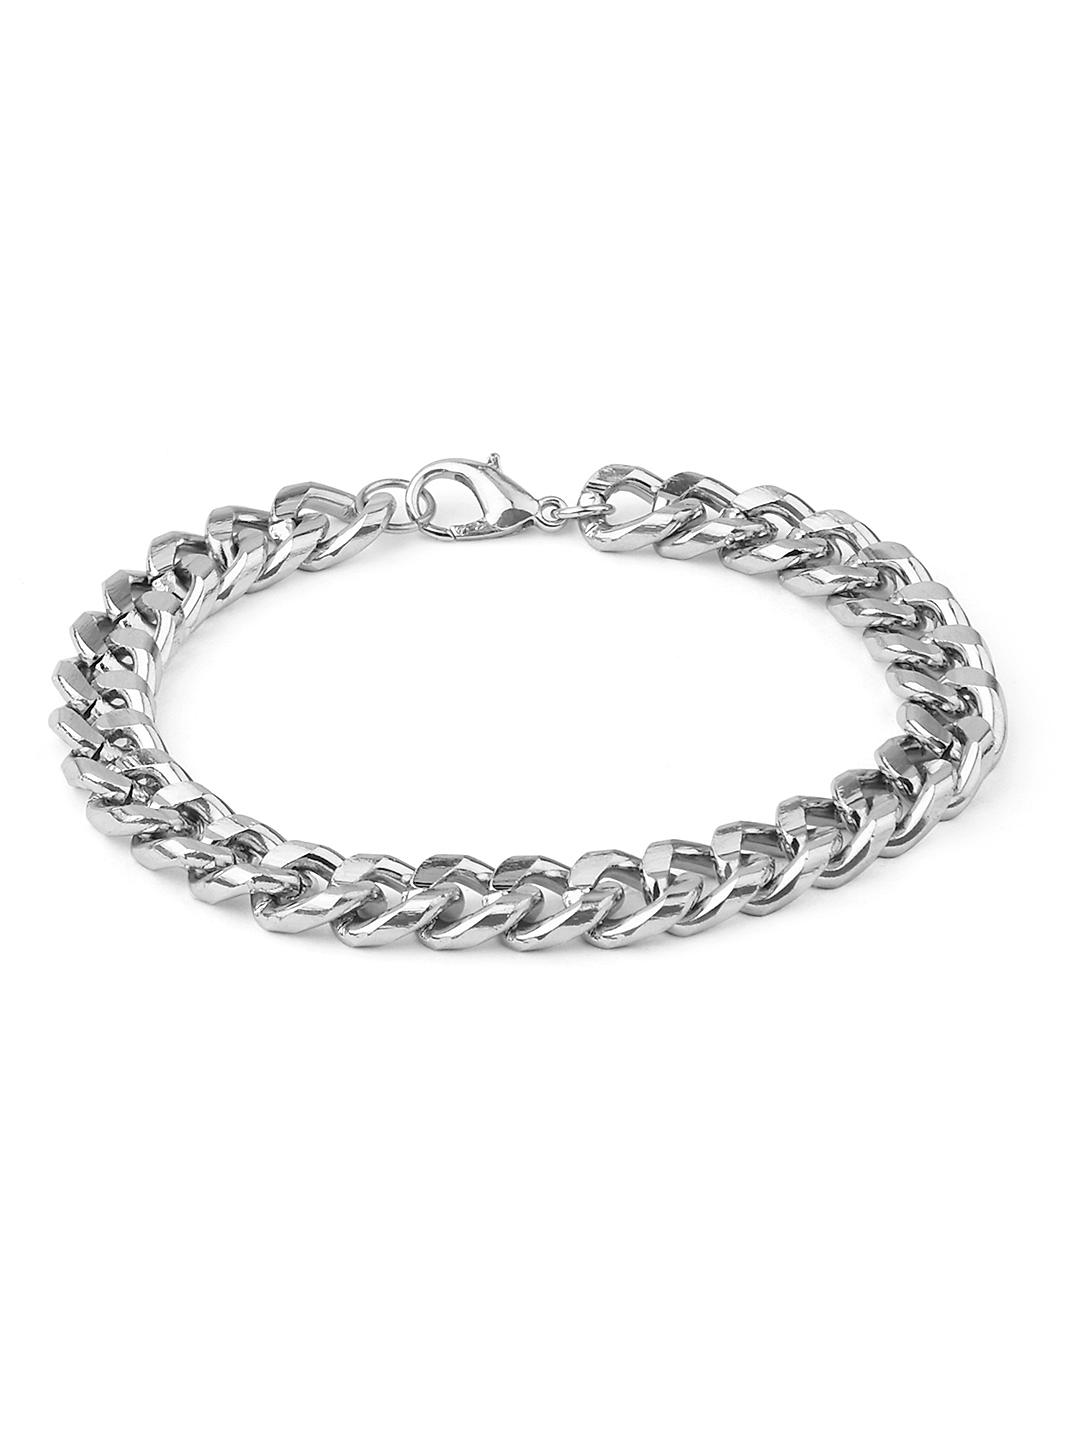 Stylish Mens Silver Plated Adjustable Latest Attractive Alloy Bracelet And  Kada For Men,Boys And Gift